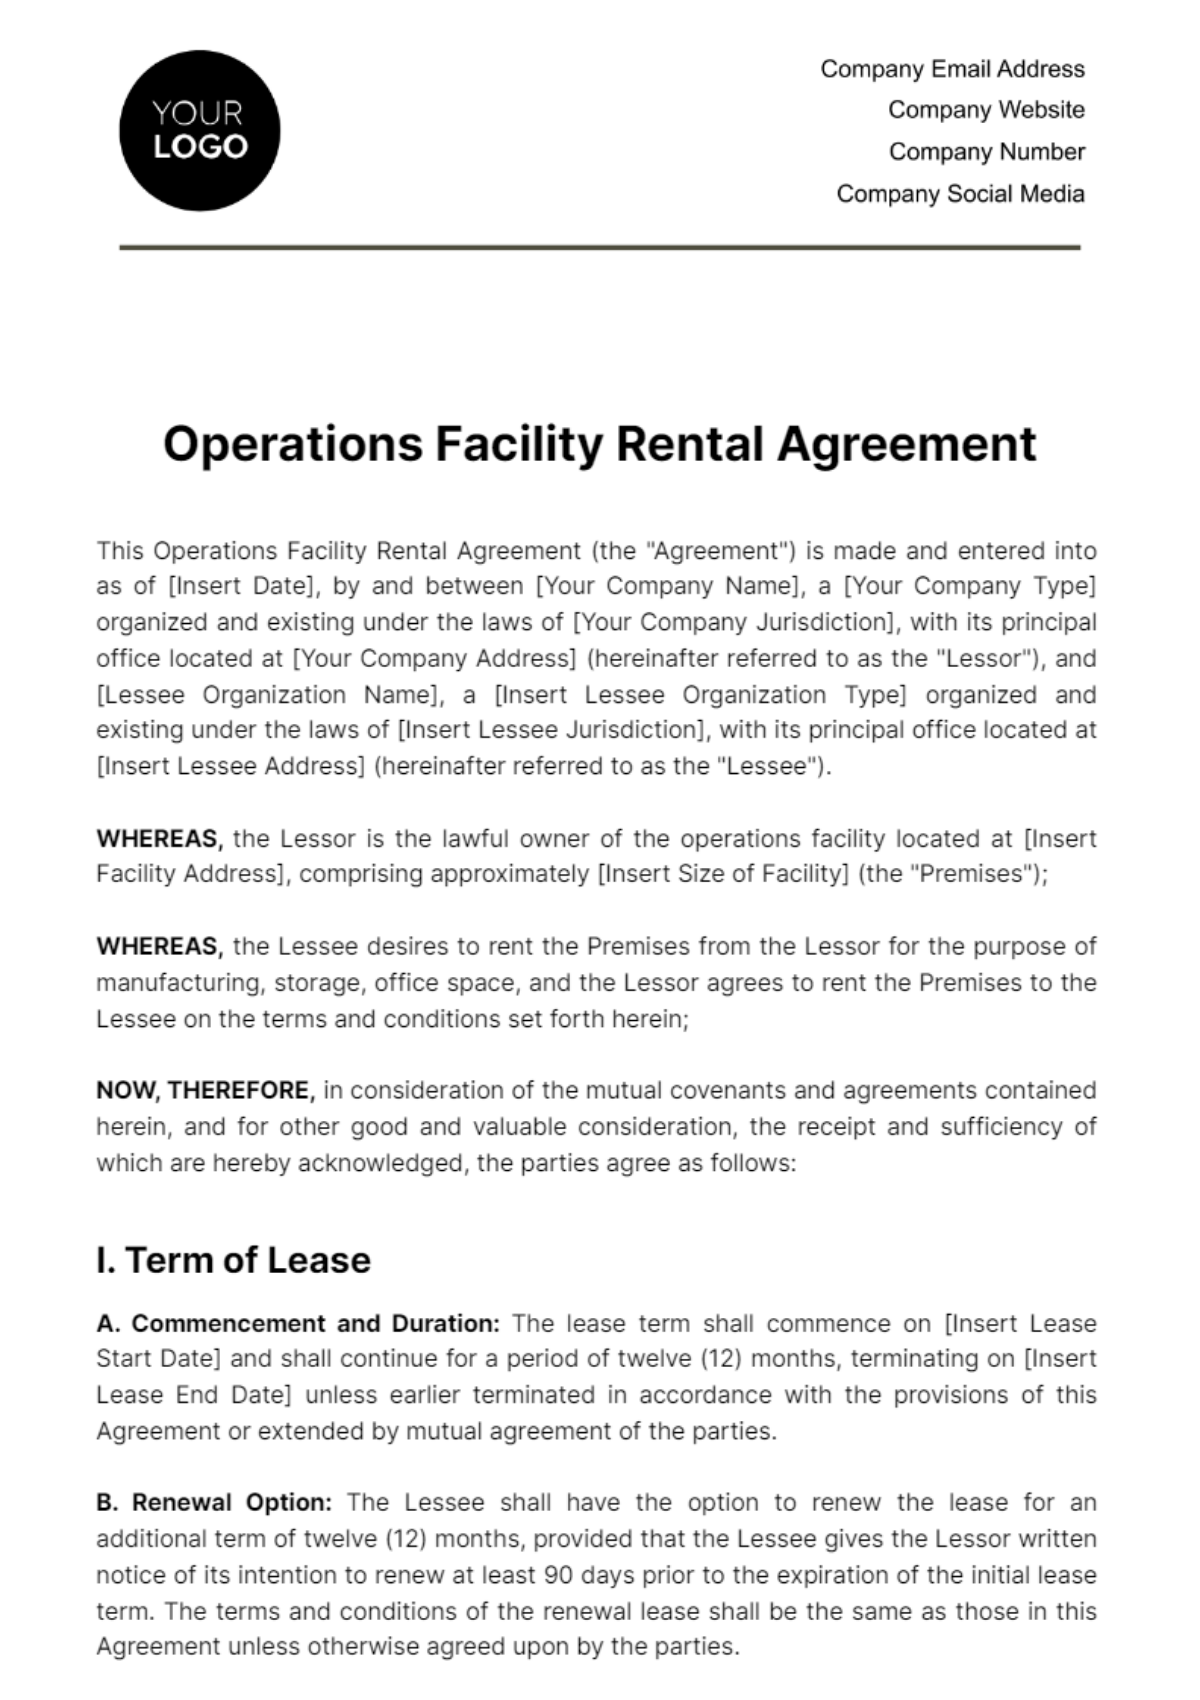 Free Operations Facility Rental Agreement Template